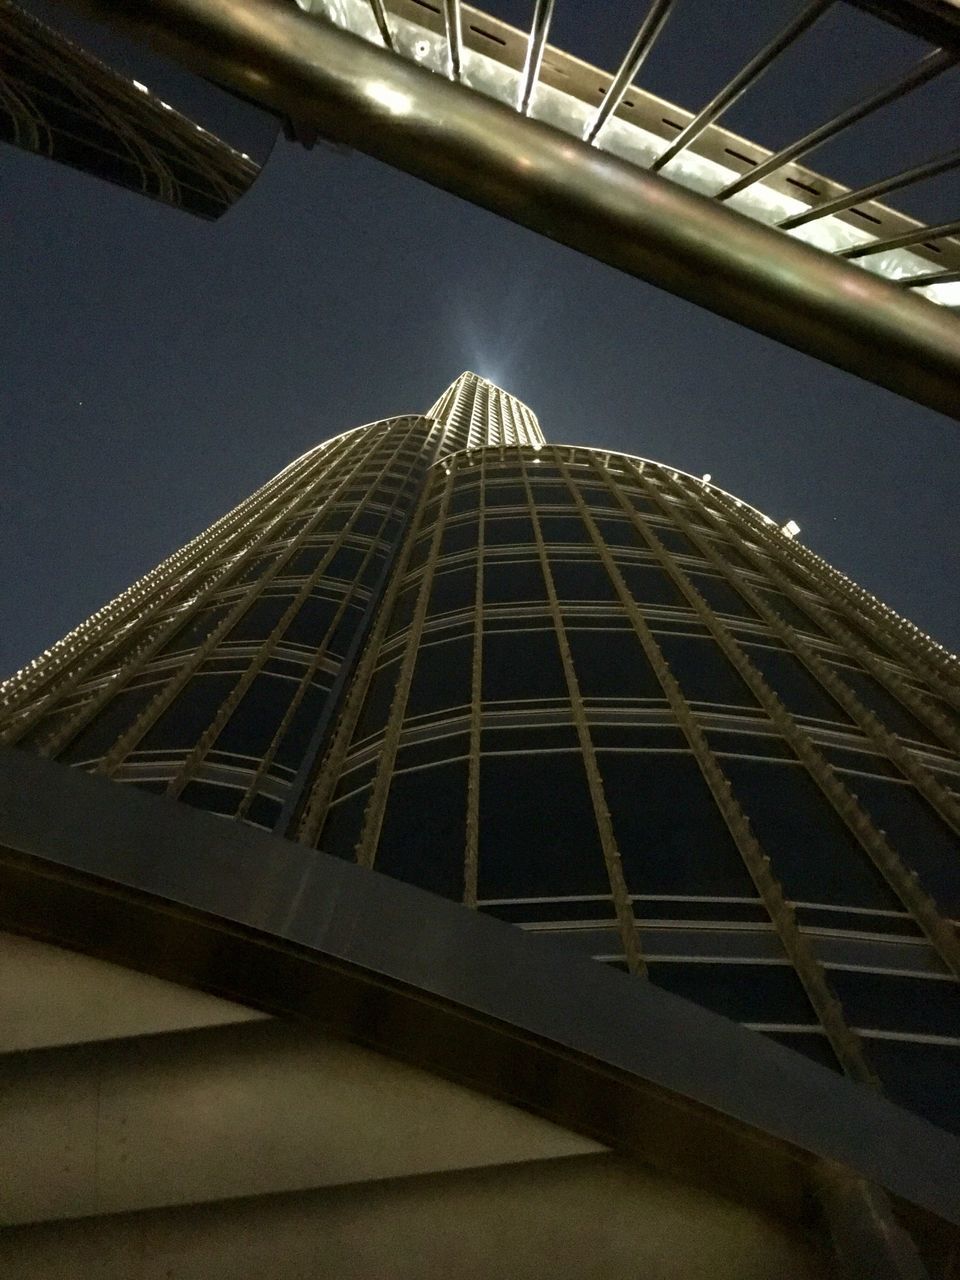 LOW ANGLE VIEW OF SKYSCRAPER